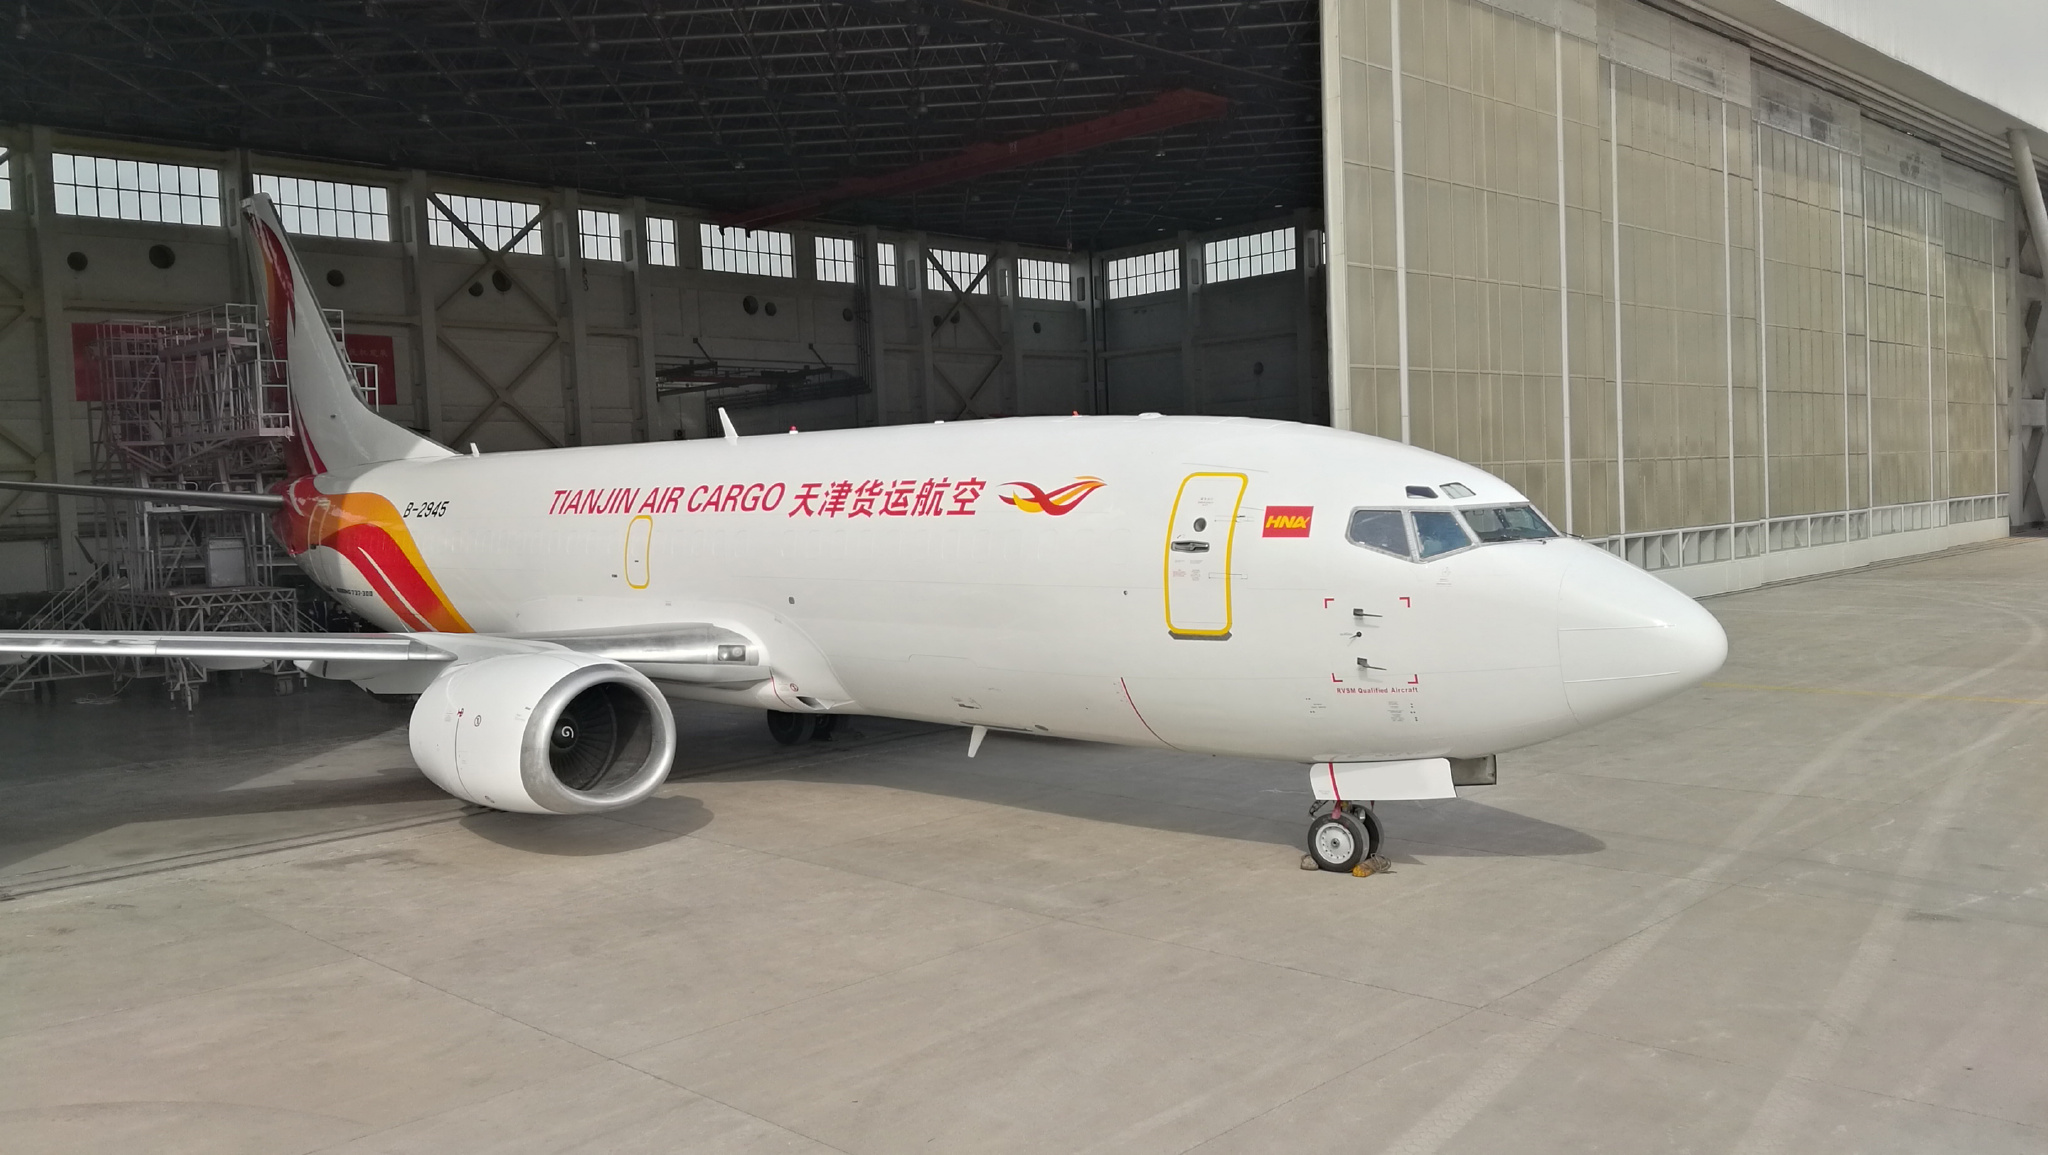 HNA Group's Tianjin Air Cargo operates three 737 freighters, but executives have said they hope to have between fifty and 100 aircraft operating for the carrier within only a few years. How many of those potential aircraft may end up operating for JD Logistics is unclear.